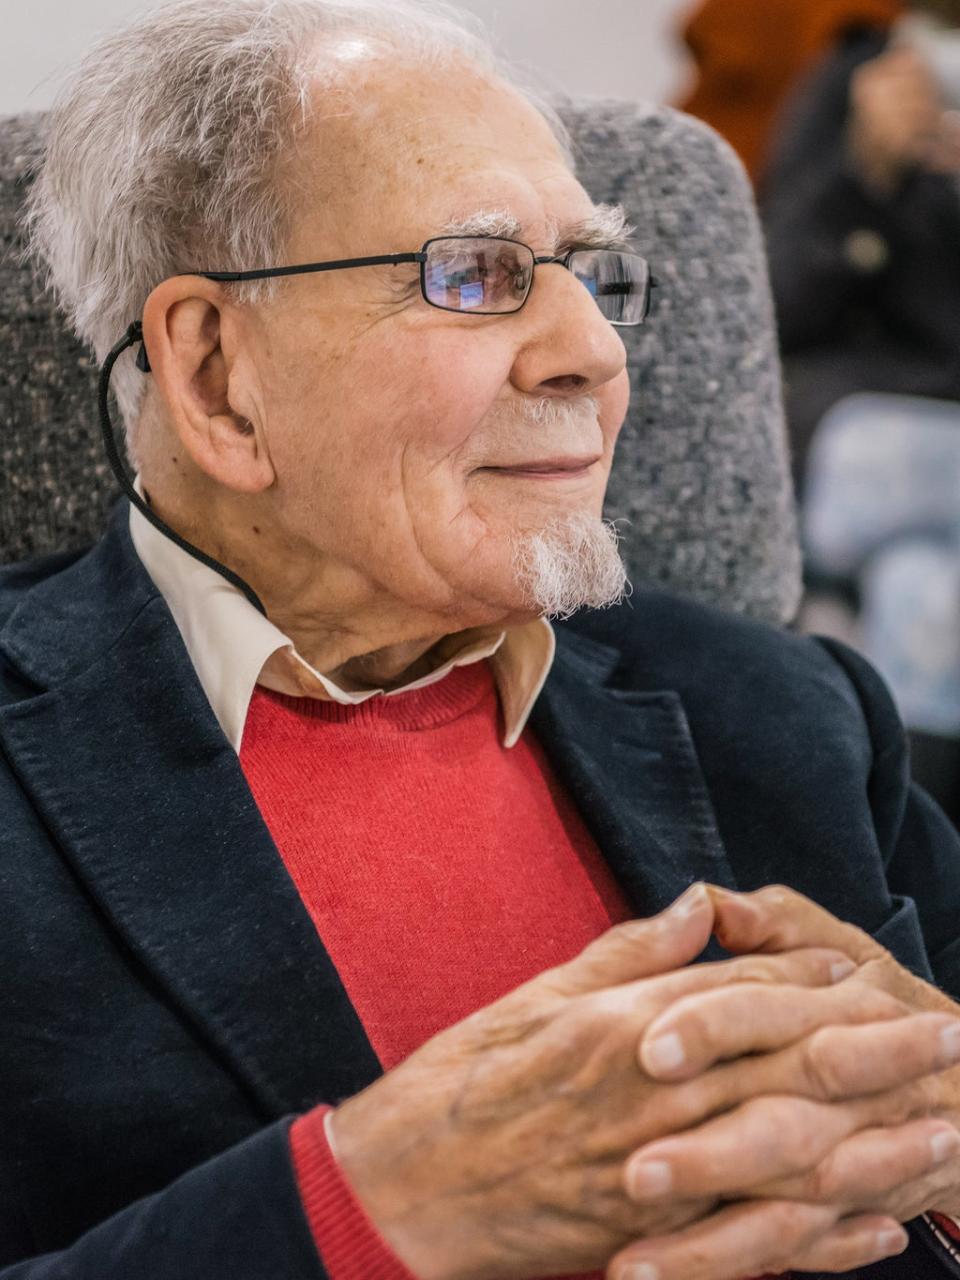 In honour of Stephen Wilkinson’s 100th birthday in 2019, the BBC Singers broadcast a special recital including a broadcast premiere of Dover Beach (Andrew Wilkinson Photography)